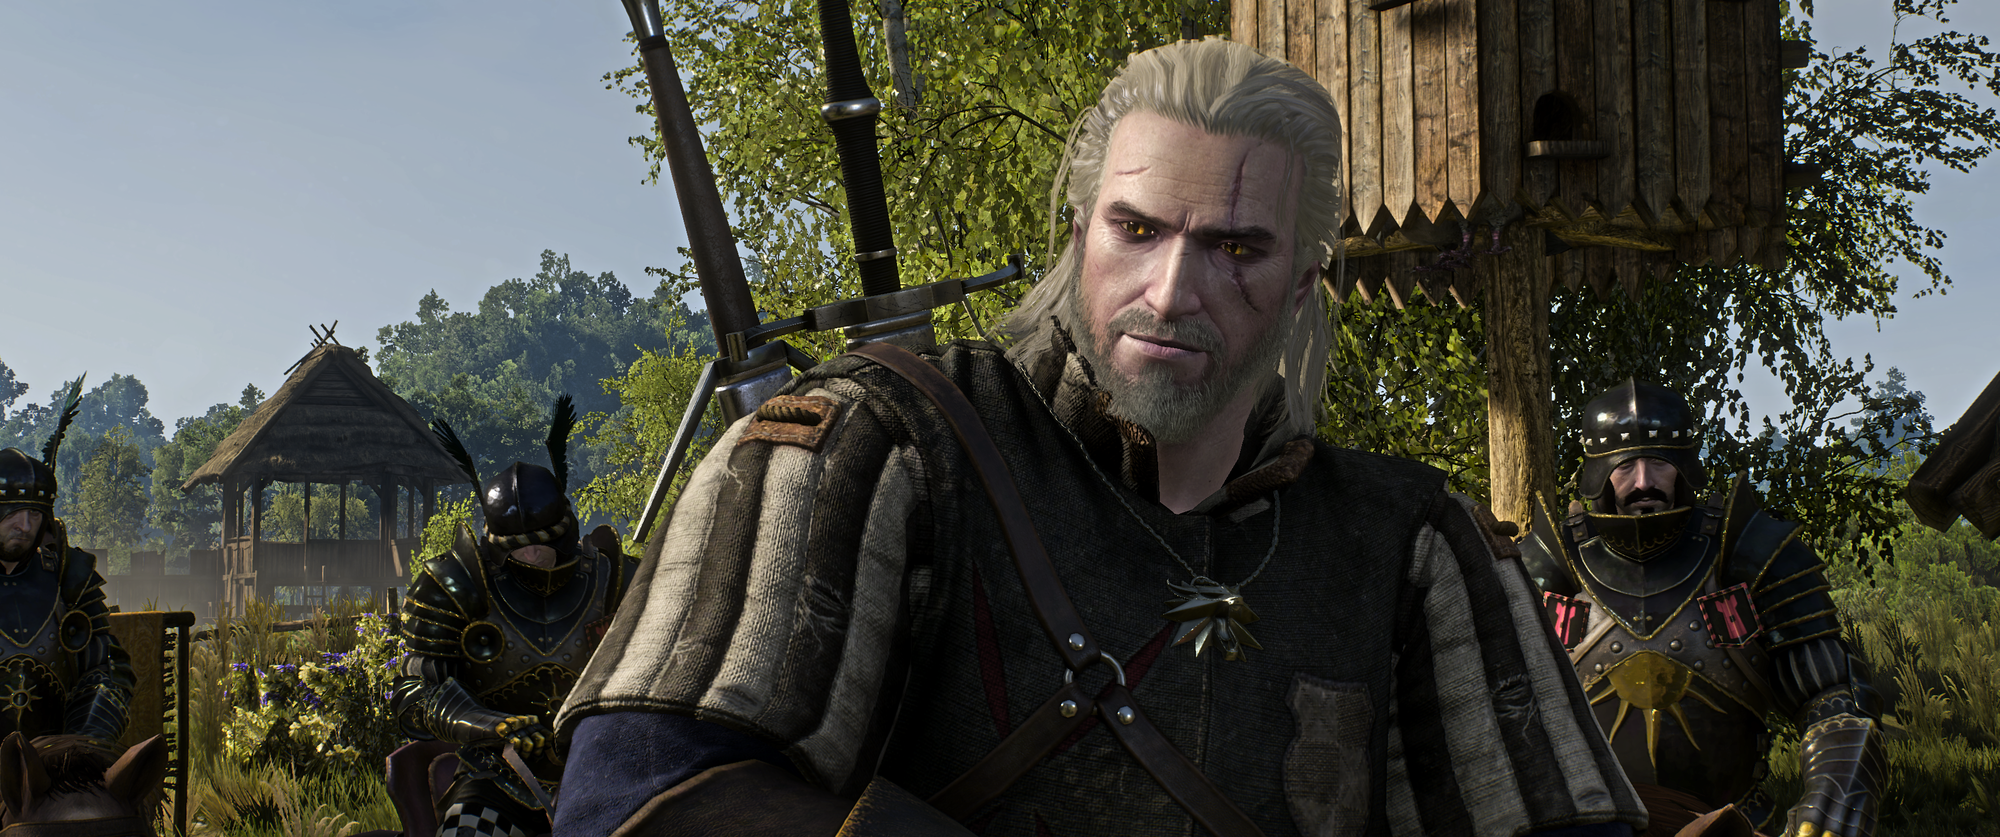 The Witcher 3 Screenshot 2019.01.02 - 22.49.24.19.png